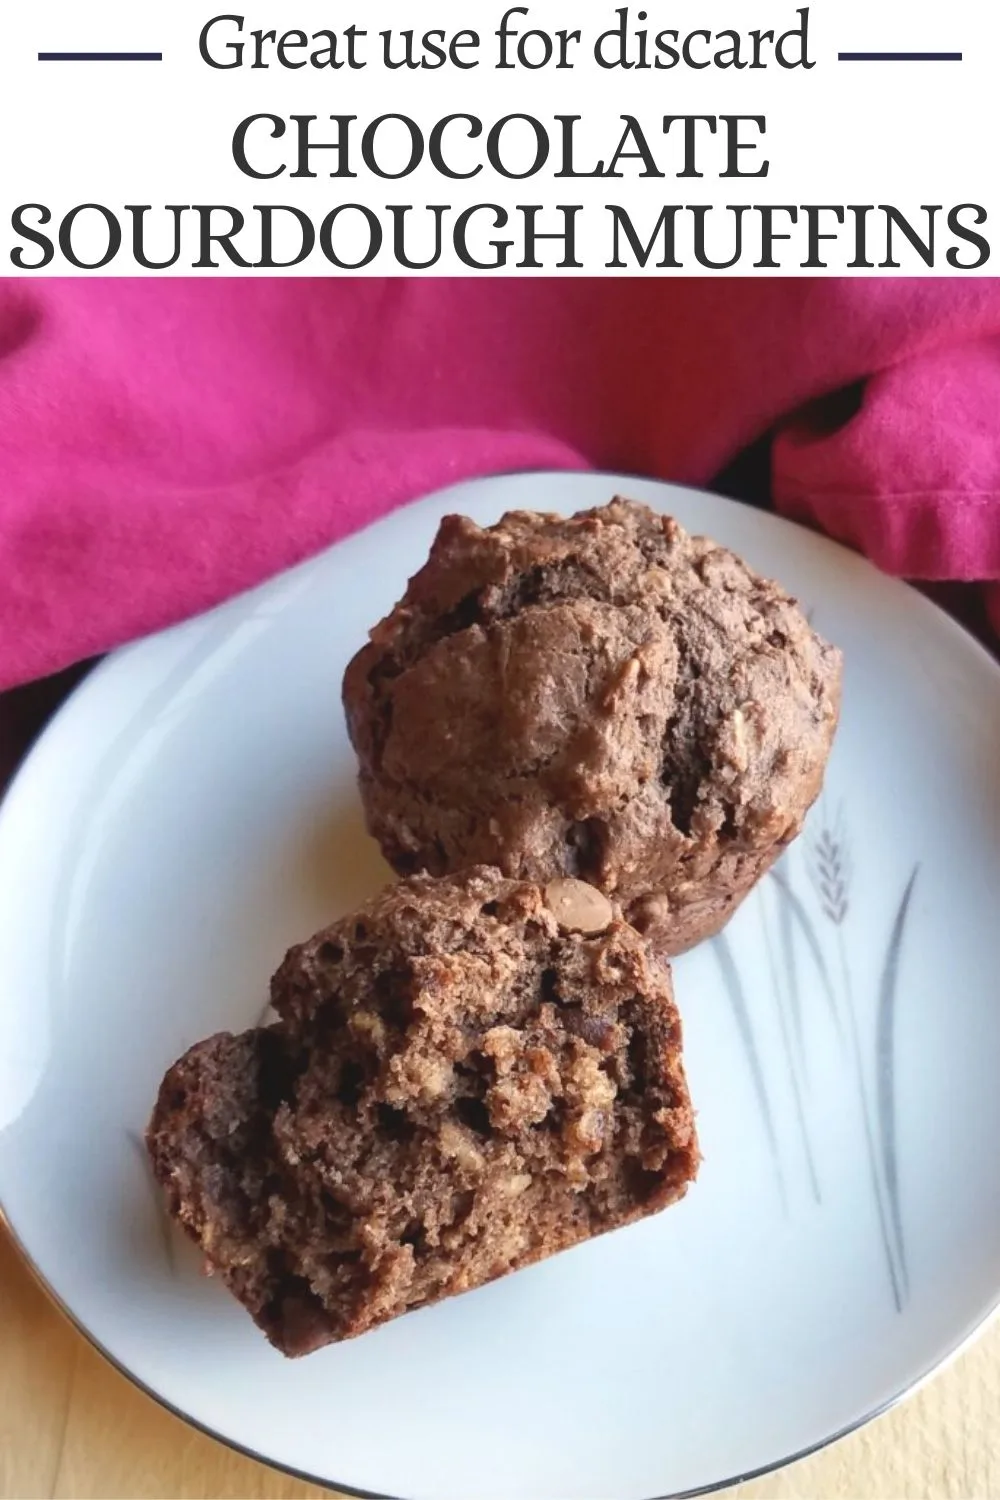 Start your day off right with these chocolate peanut butter sourdough muffins. They taste super indulgent, but are healthier than a lot of other muffin options. These babies whip up in a snap and help use up some sourdough starter discard. You should make some and see your yourself!